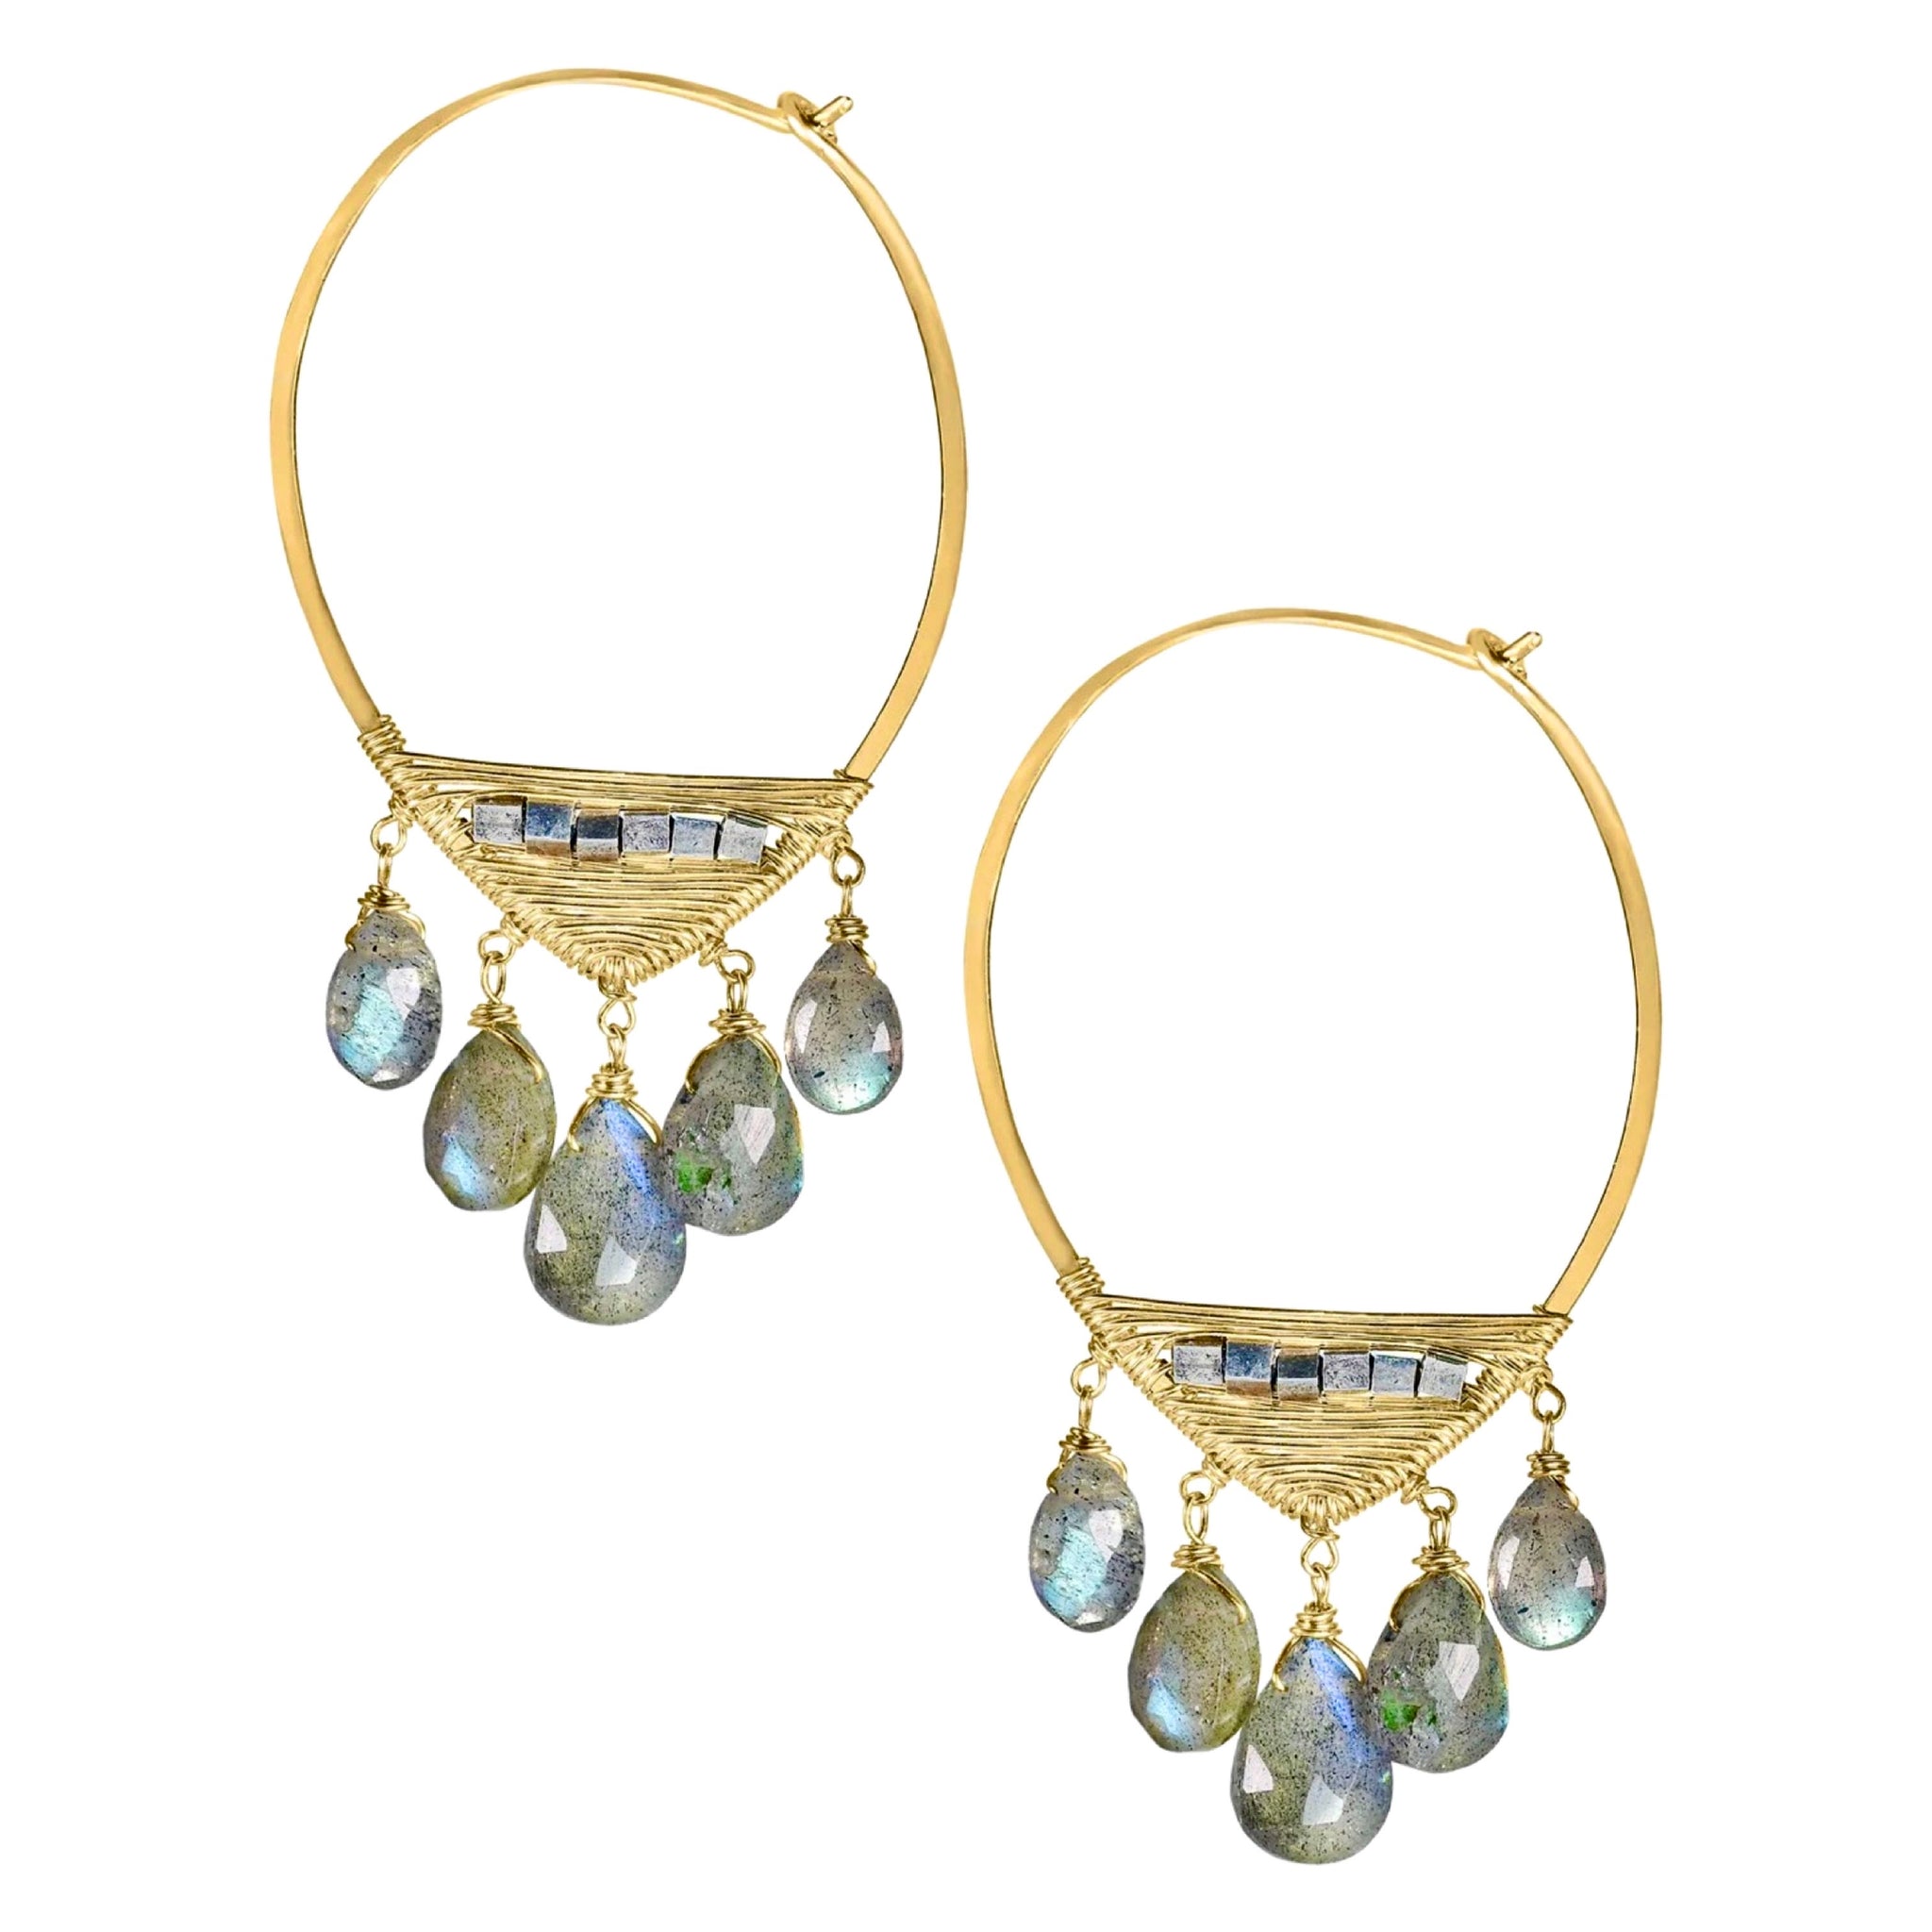 Dana Kellin Mezzo Hoop Earrings available at Shaylula Jewlery & Gifts in Tarrytown, NY and online. Cascading labradorite briolettes add a flurry of movement and flash to these mixed metal hoops by Dana Kellin.  • 14k gold fill, sterling silver, labradorite  • 1.81" L x .1"  W  • Earwire